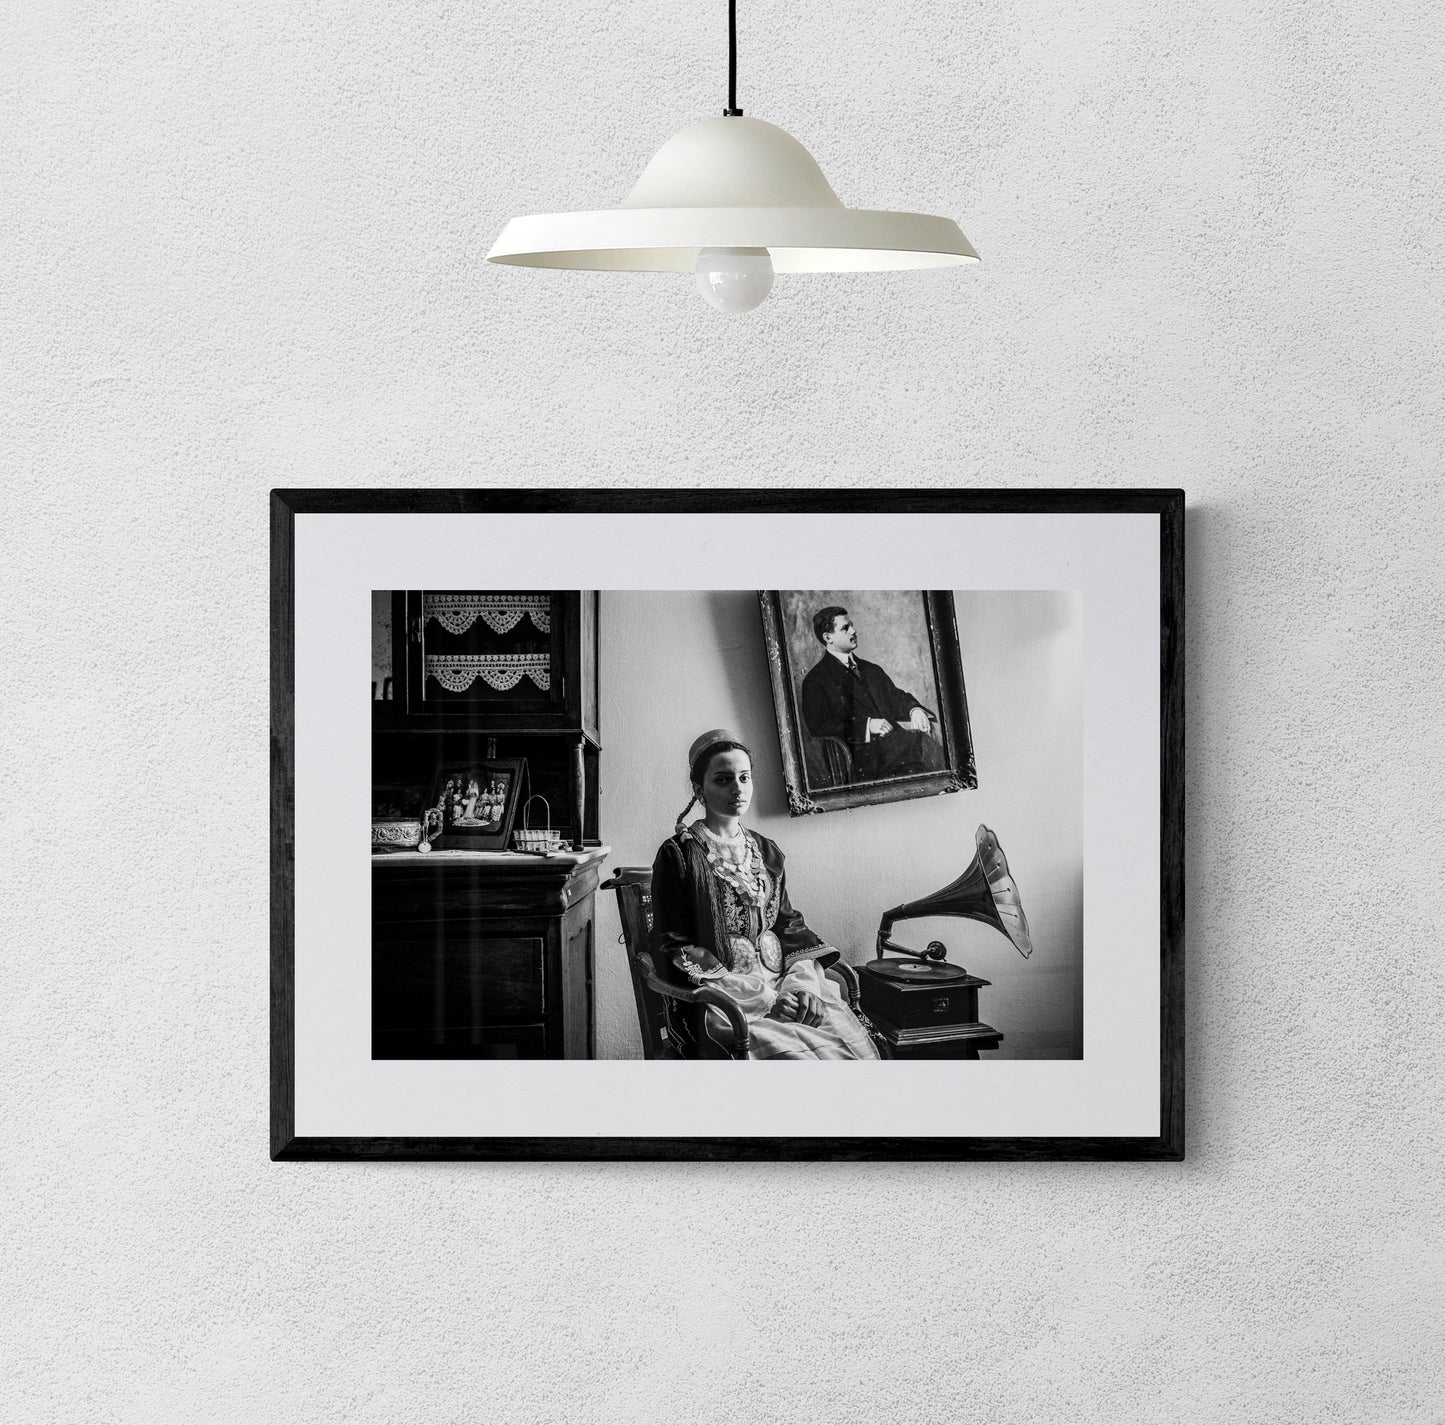 Black and White Photography Wall Art Greece | Costume of Tegea in a traditional home Arcadia Peloponnese by George Tatakis - single framed photo